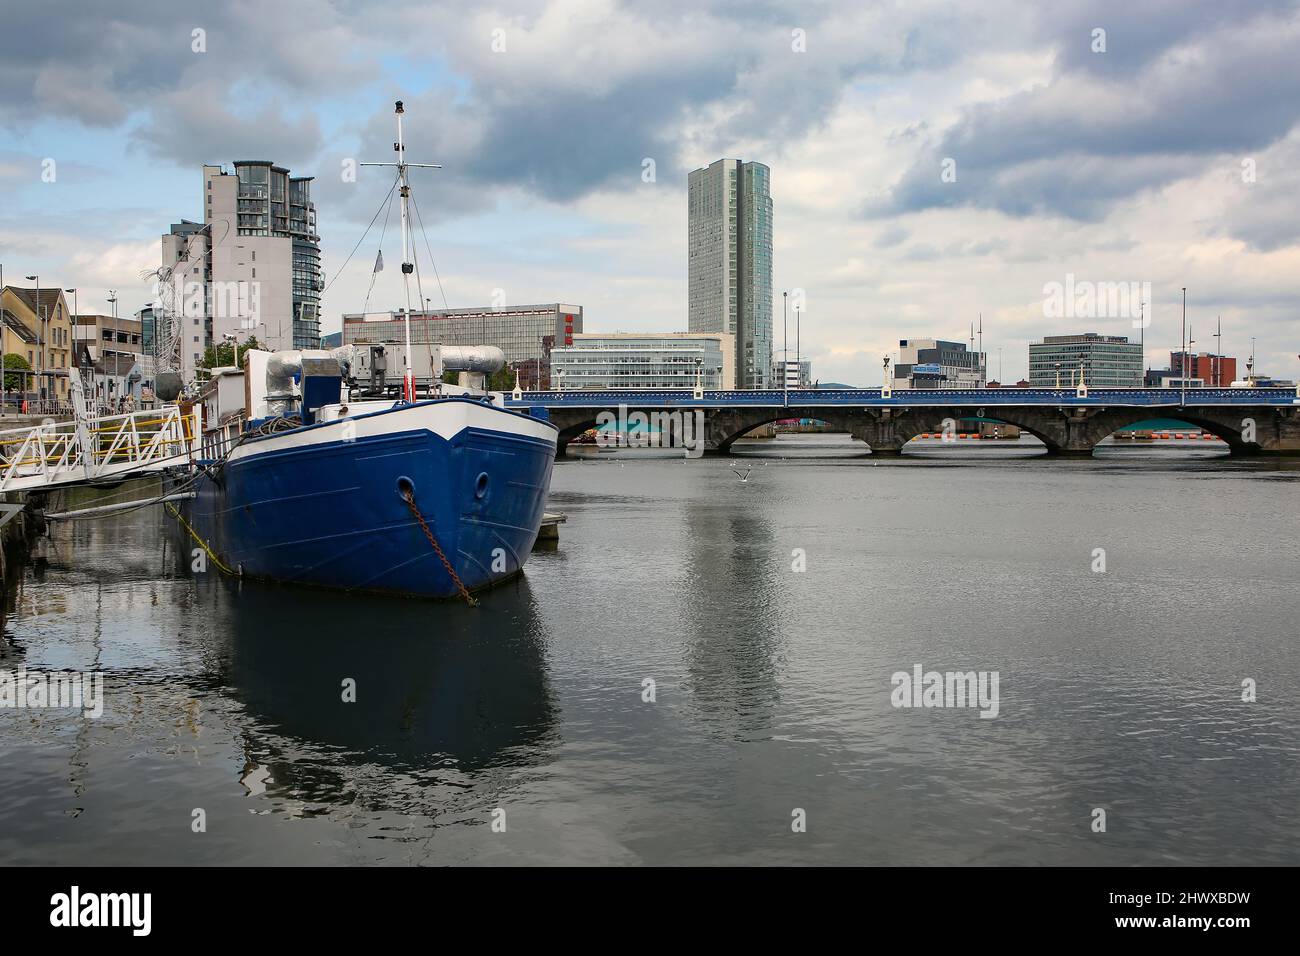 View down the River Lagan, from the Donegall Quay with many bridges over the water and fishing boats in the city center. Belfast, Northern Ireland. Stock Photo